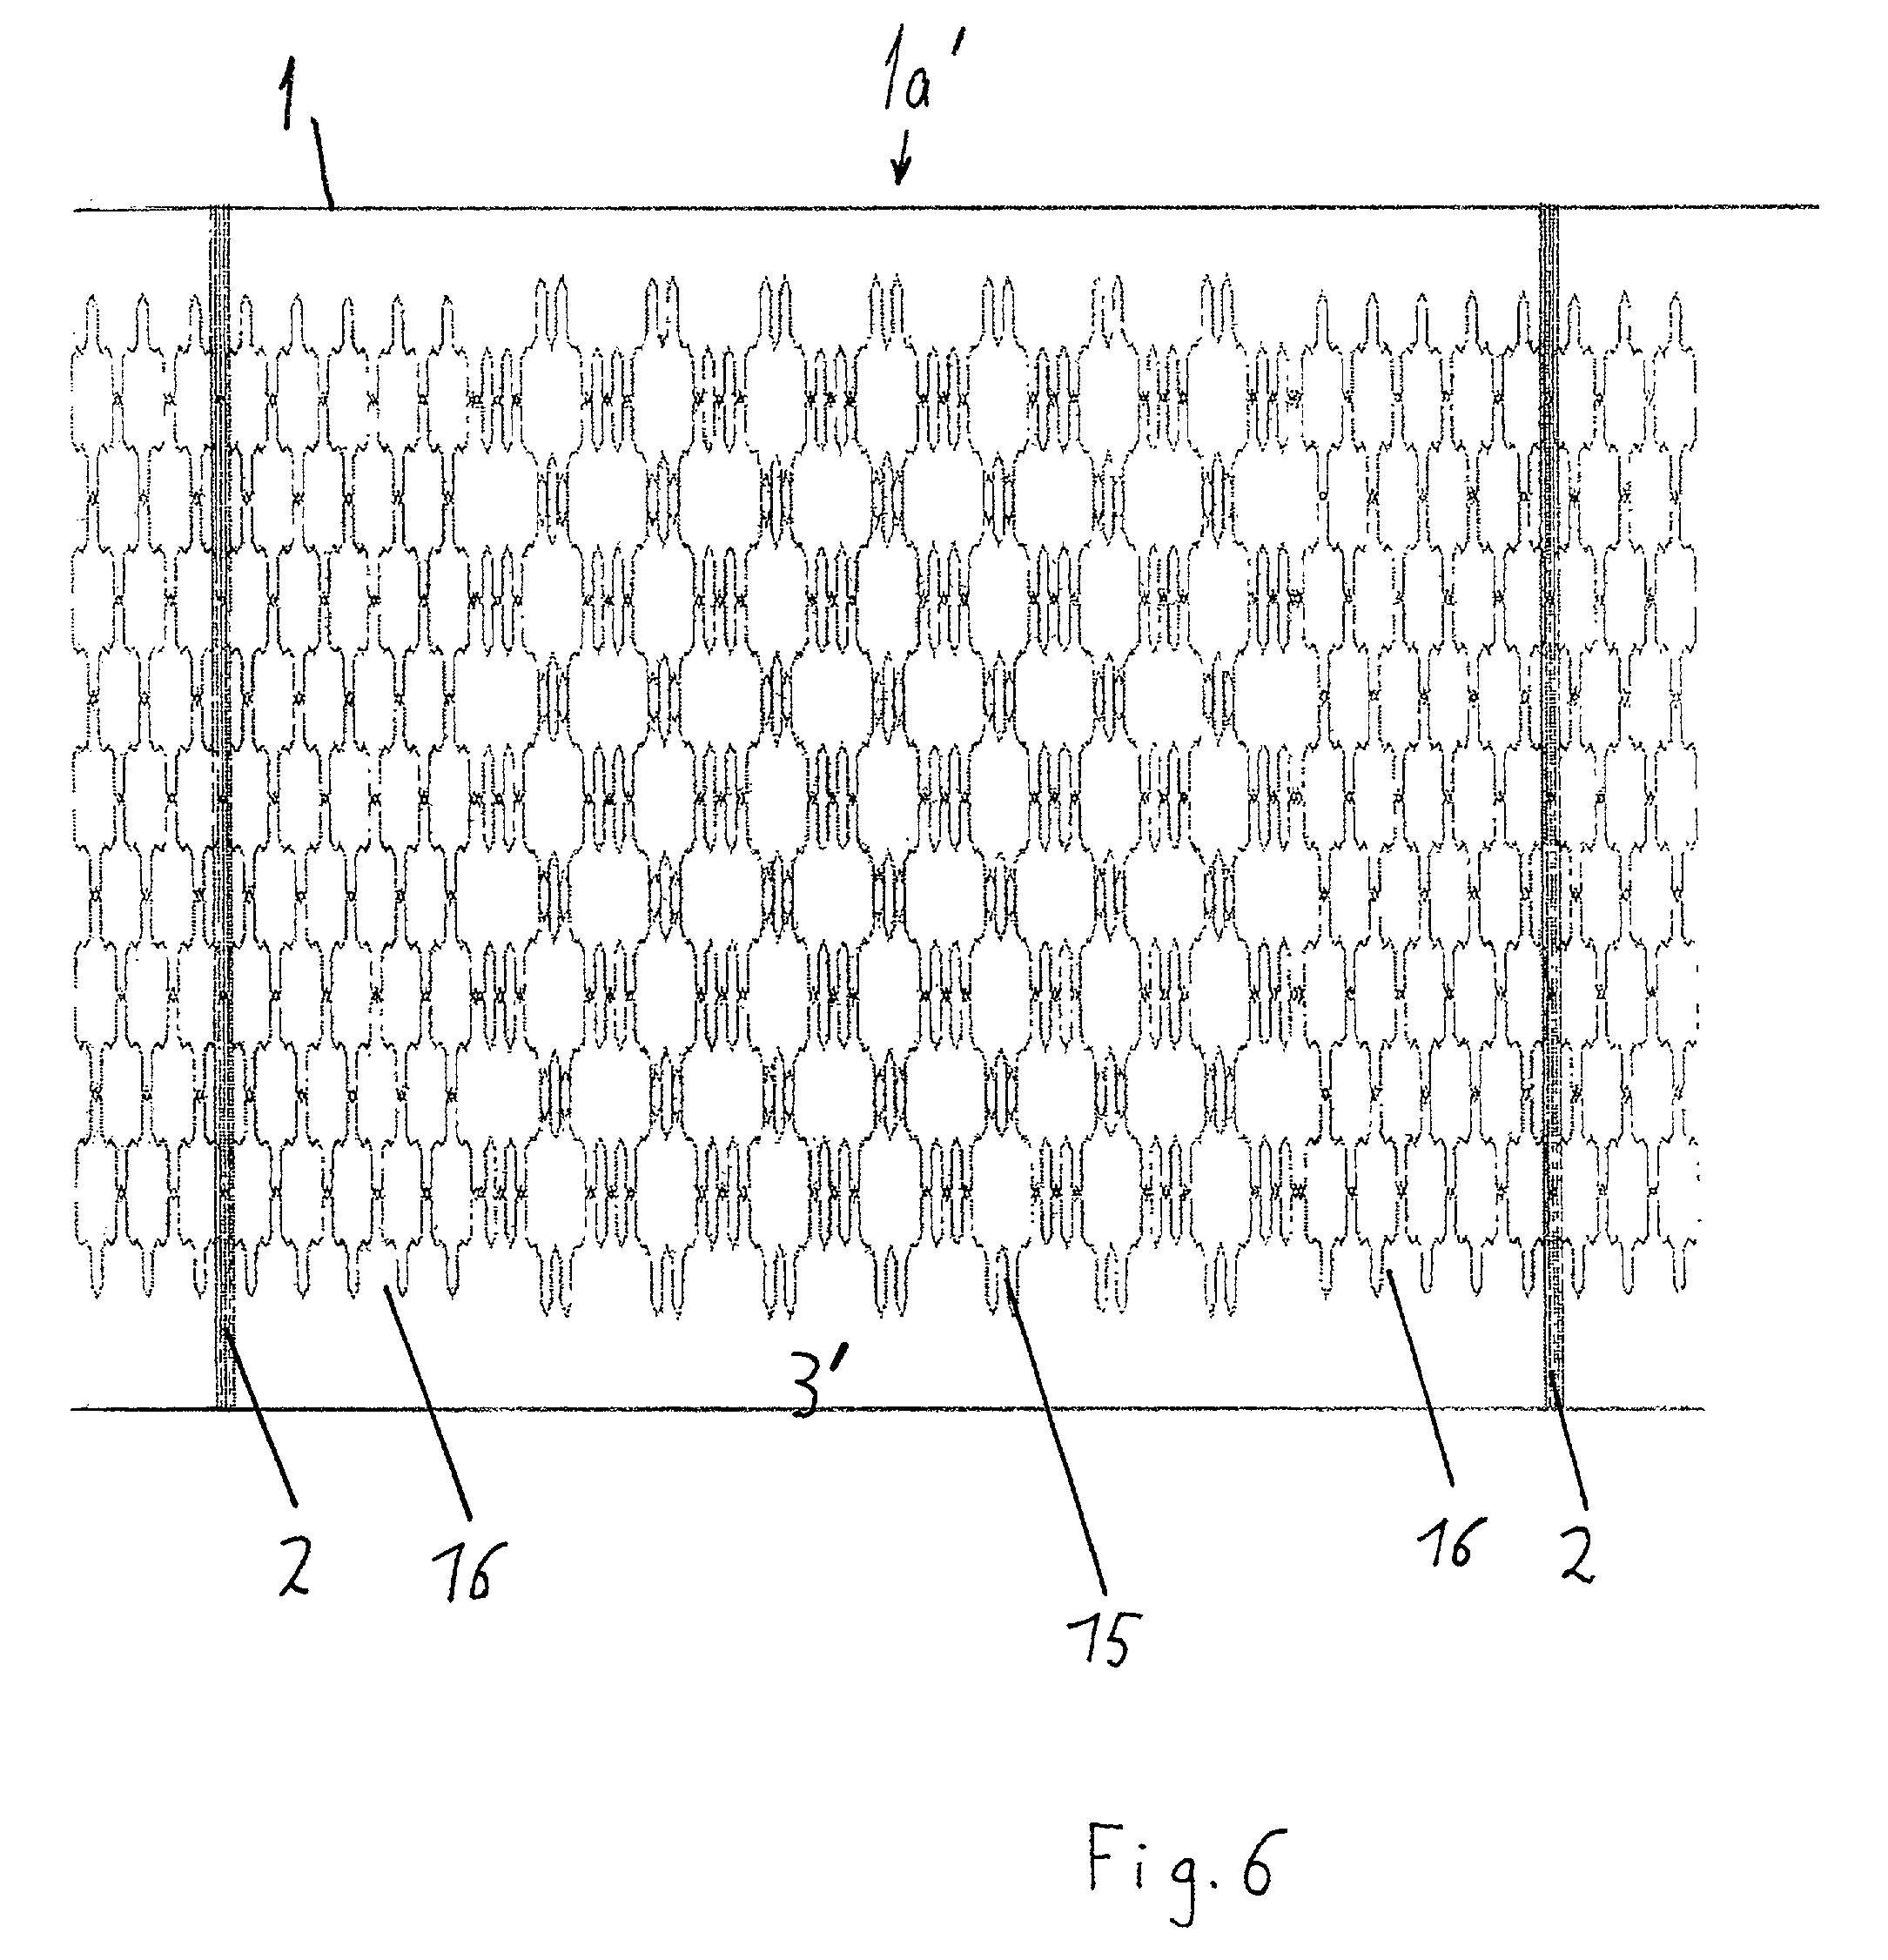 Knitted two-dimensional heating element